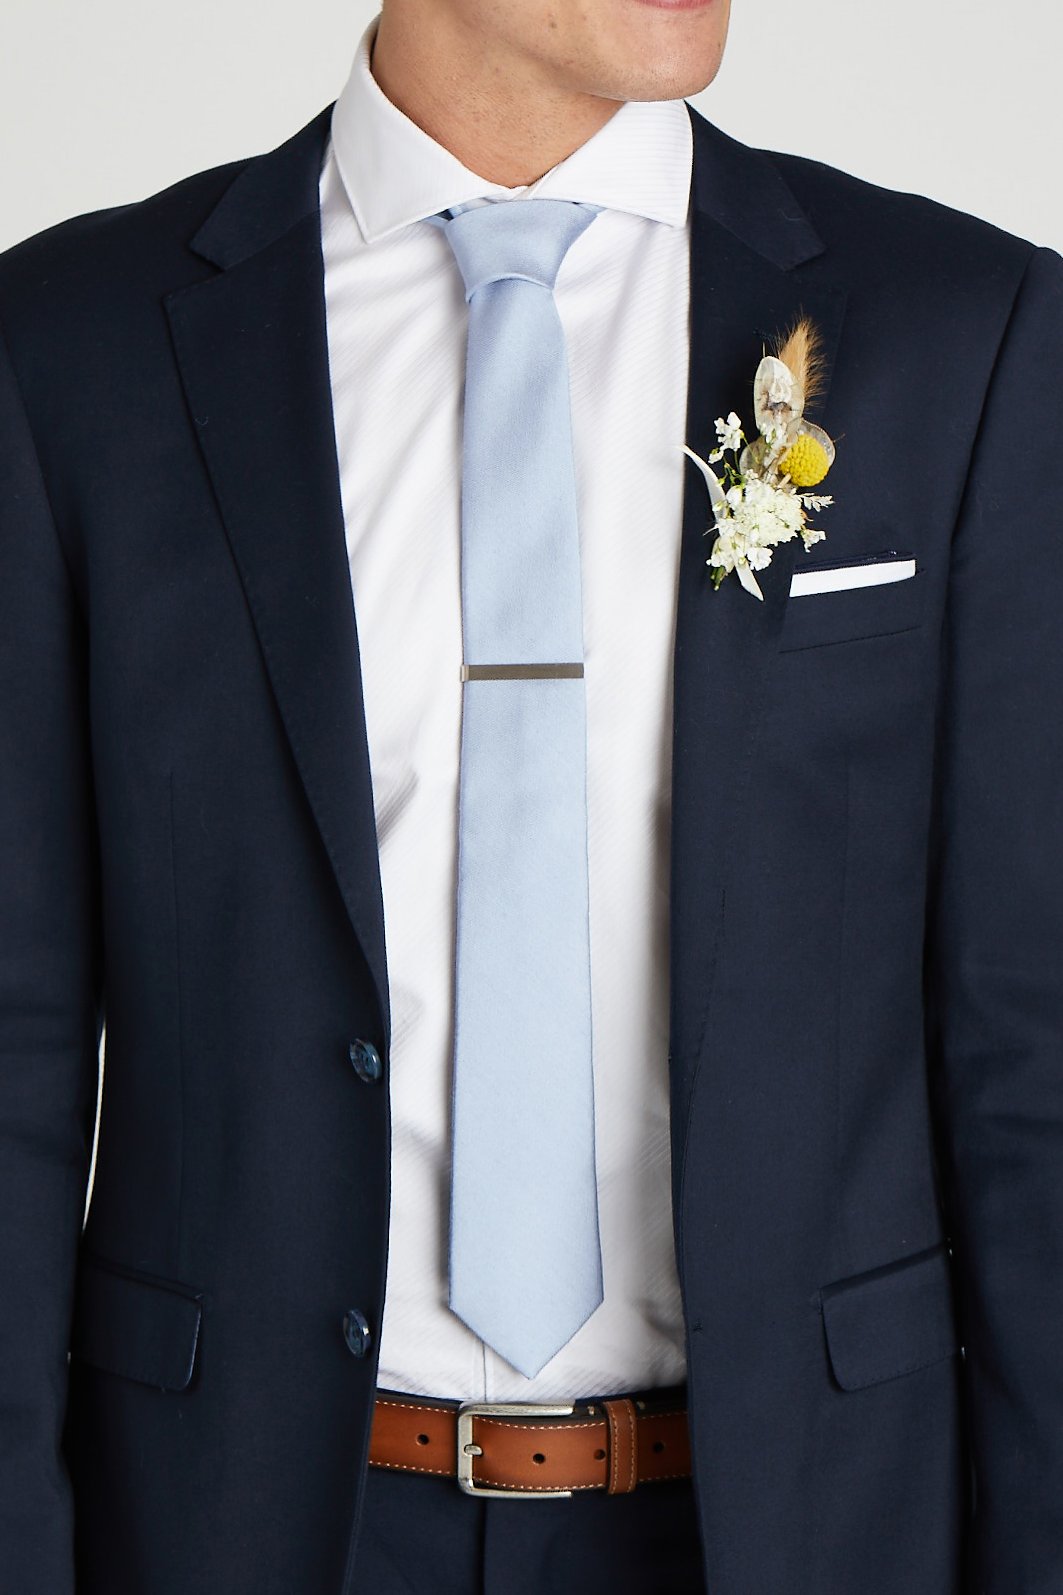 Front closeup view of the model wearing the Simon Necktie in dusty blue with a white button down collared shirt and navy blue suit. The tie is kept in place with a narrow rectangular tie clasp in matte silver.